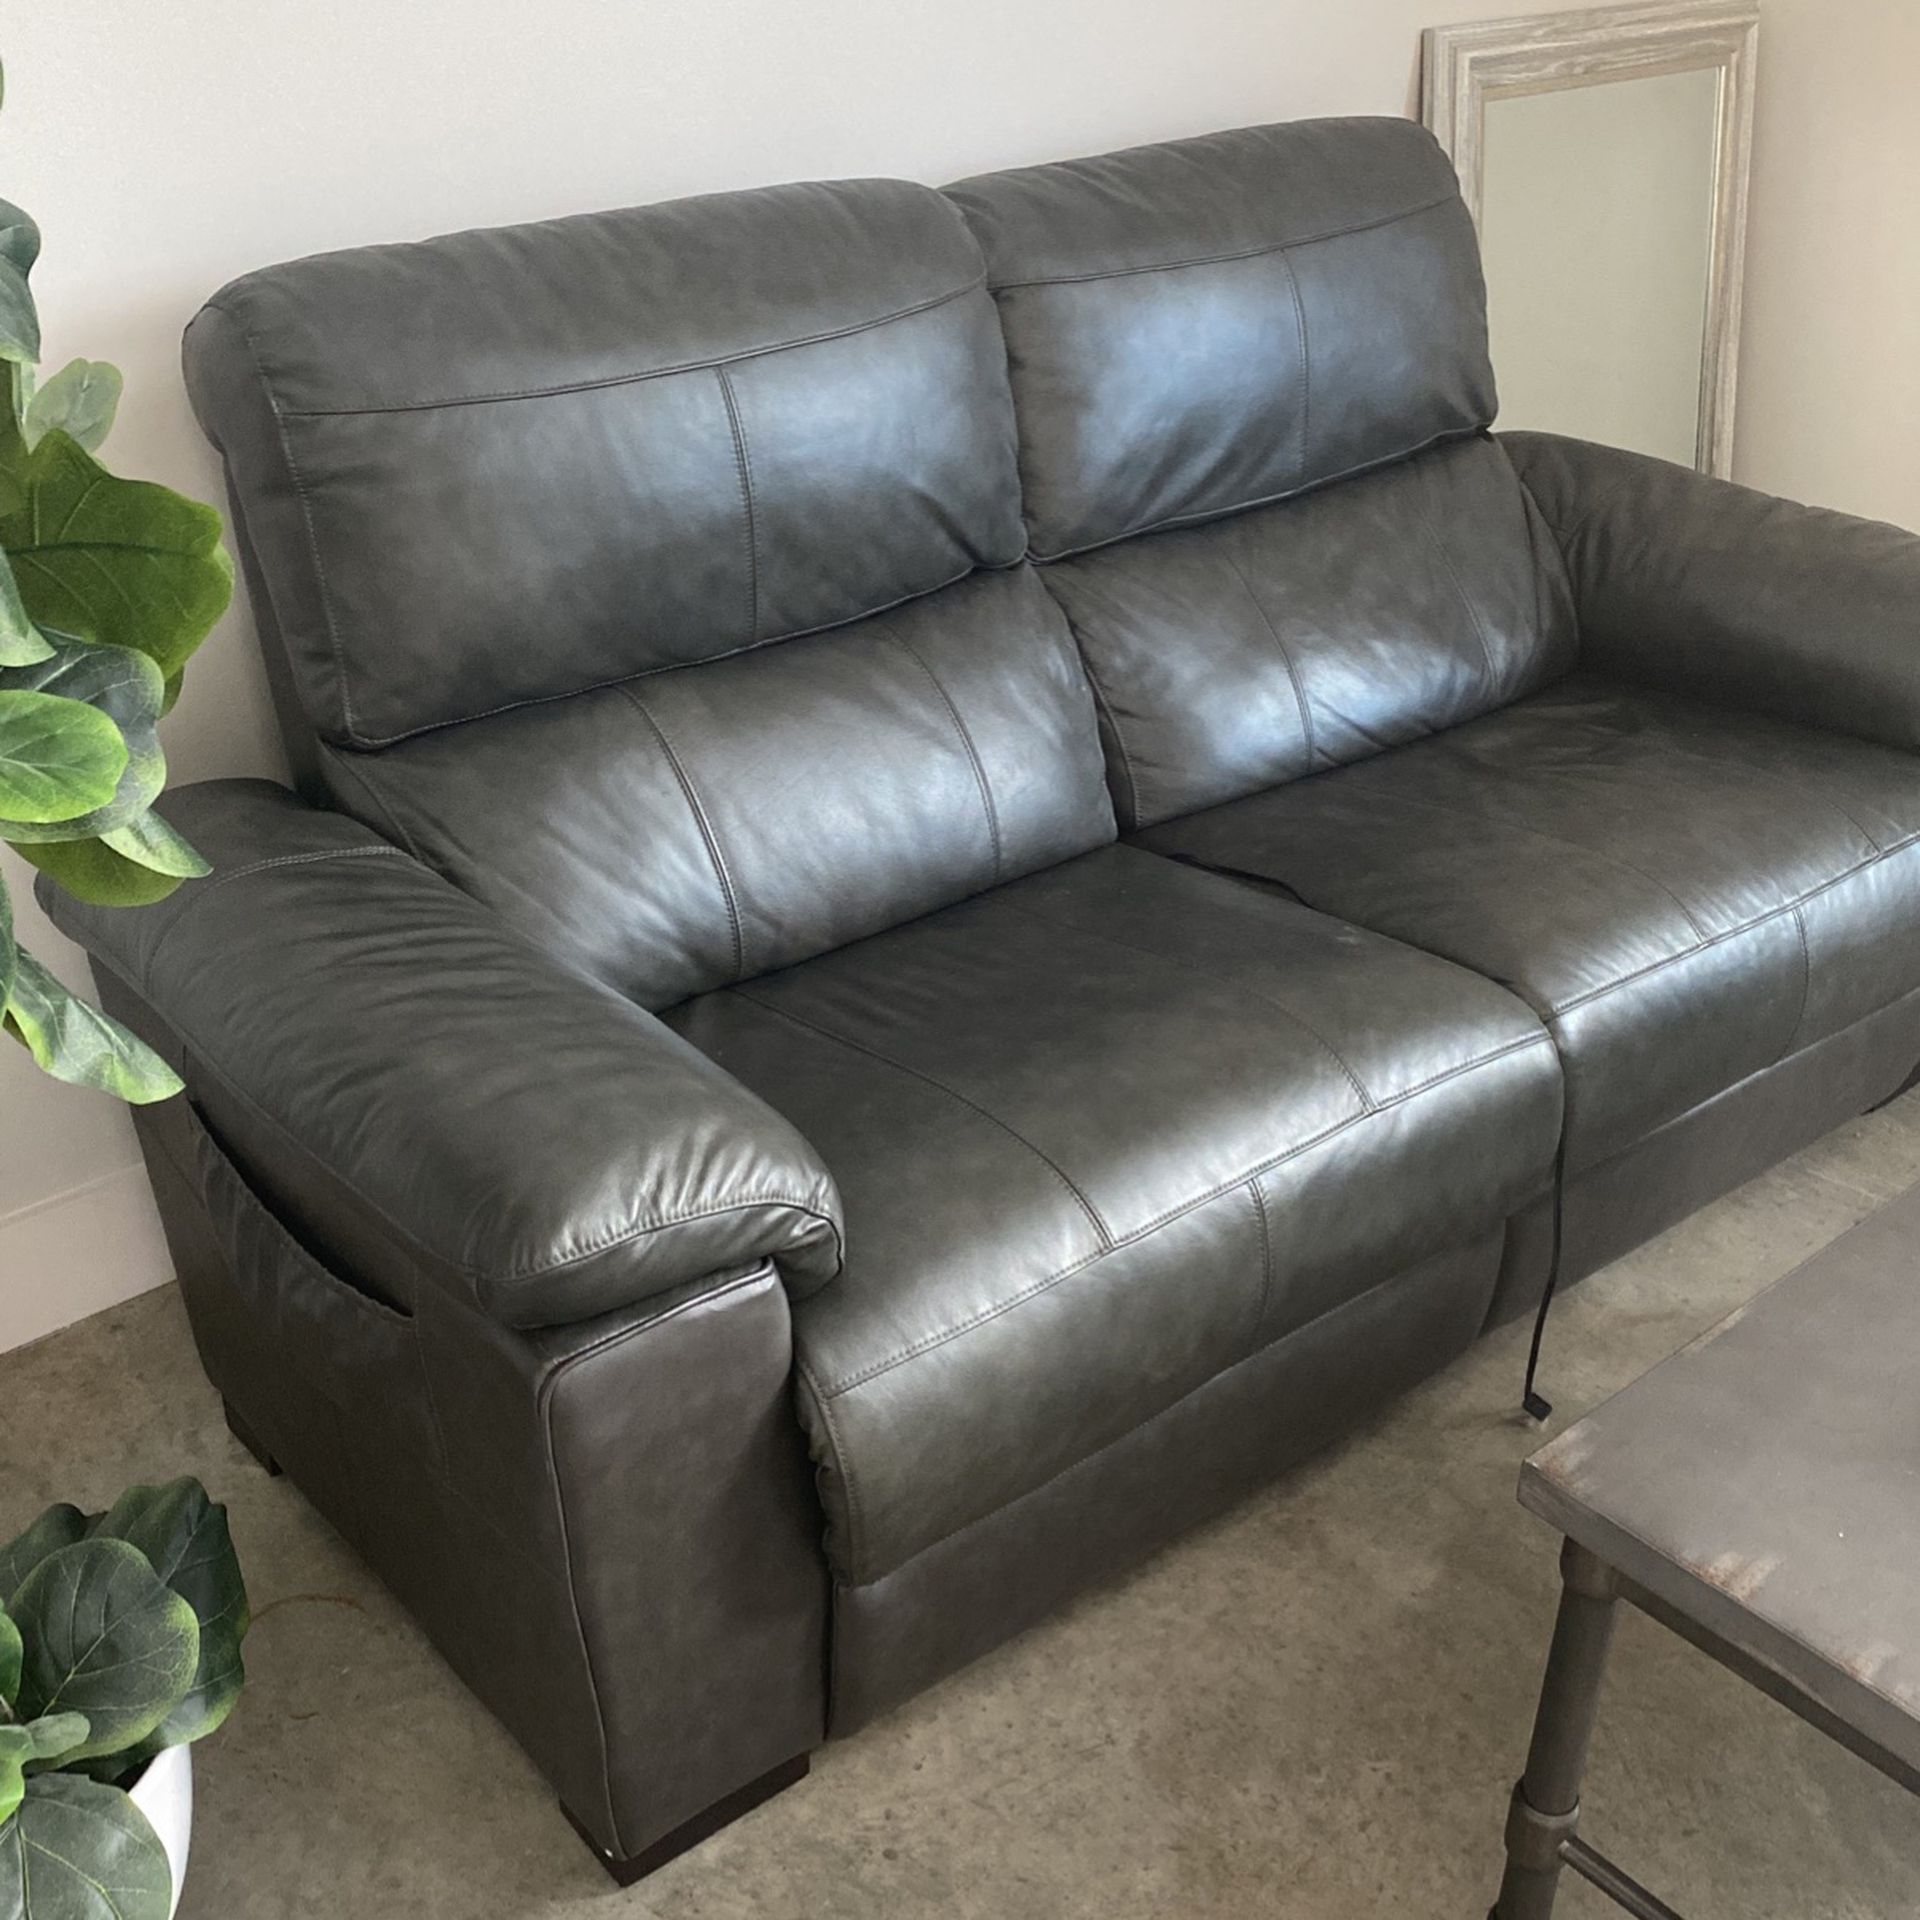 Couch - Recliner - Leather Italia. Large Love Seat